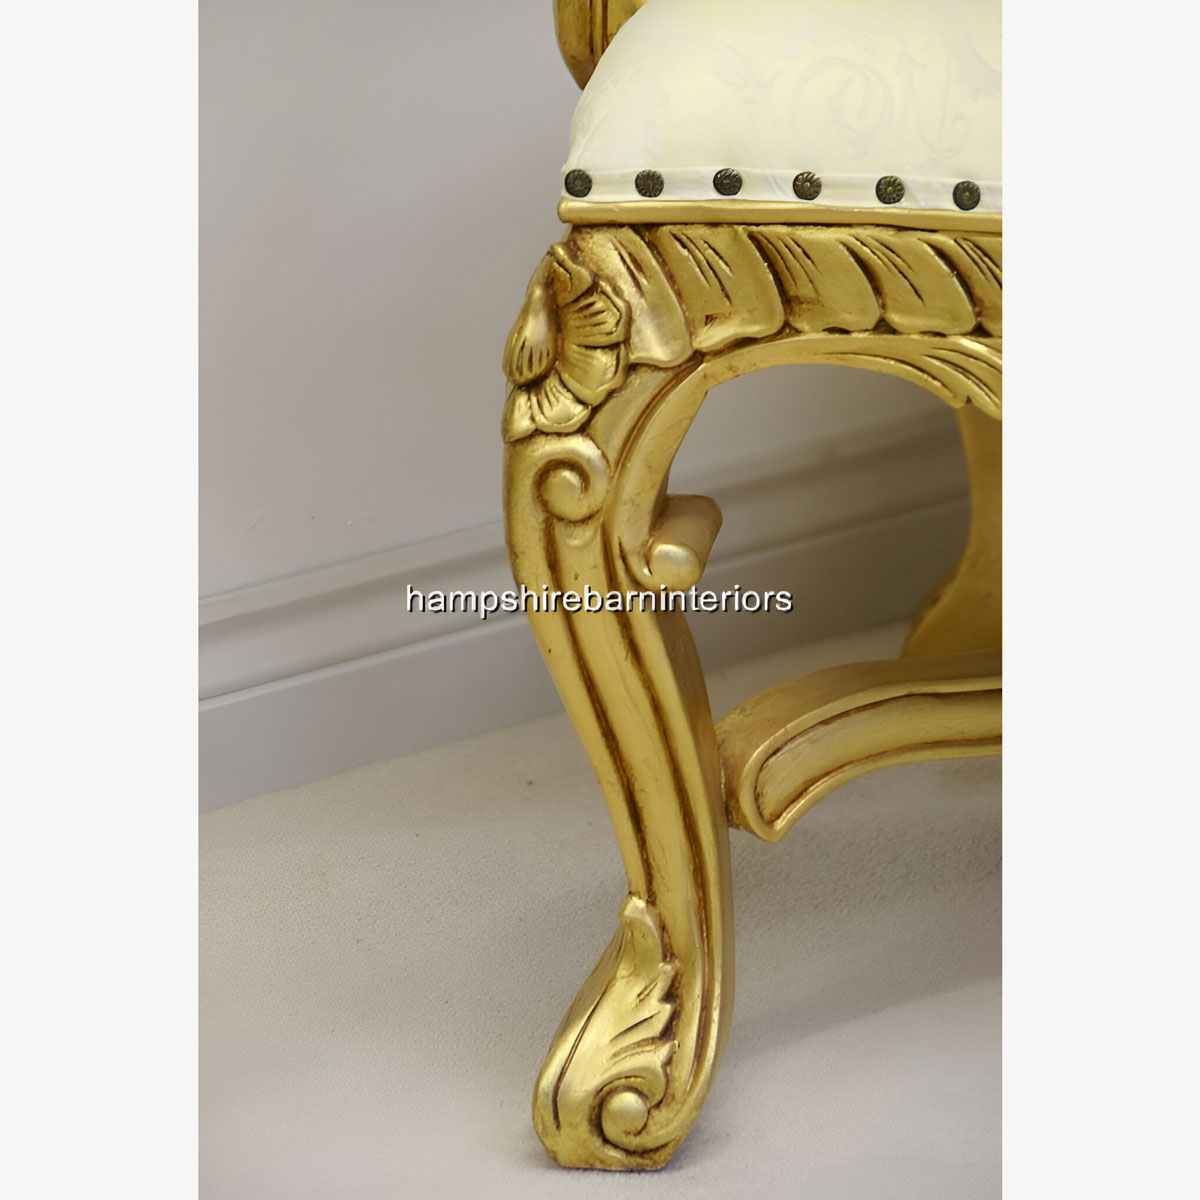 Large Kings Throne Chair In Gold And Cream Fabric 4 - Hampshire Barn Interiors - Large Kings Throne Chair In Gold And Cream Fabric -